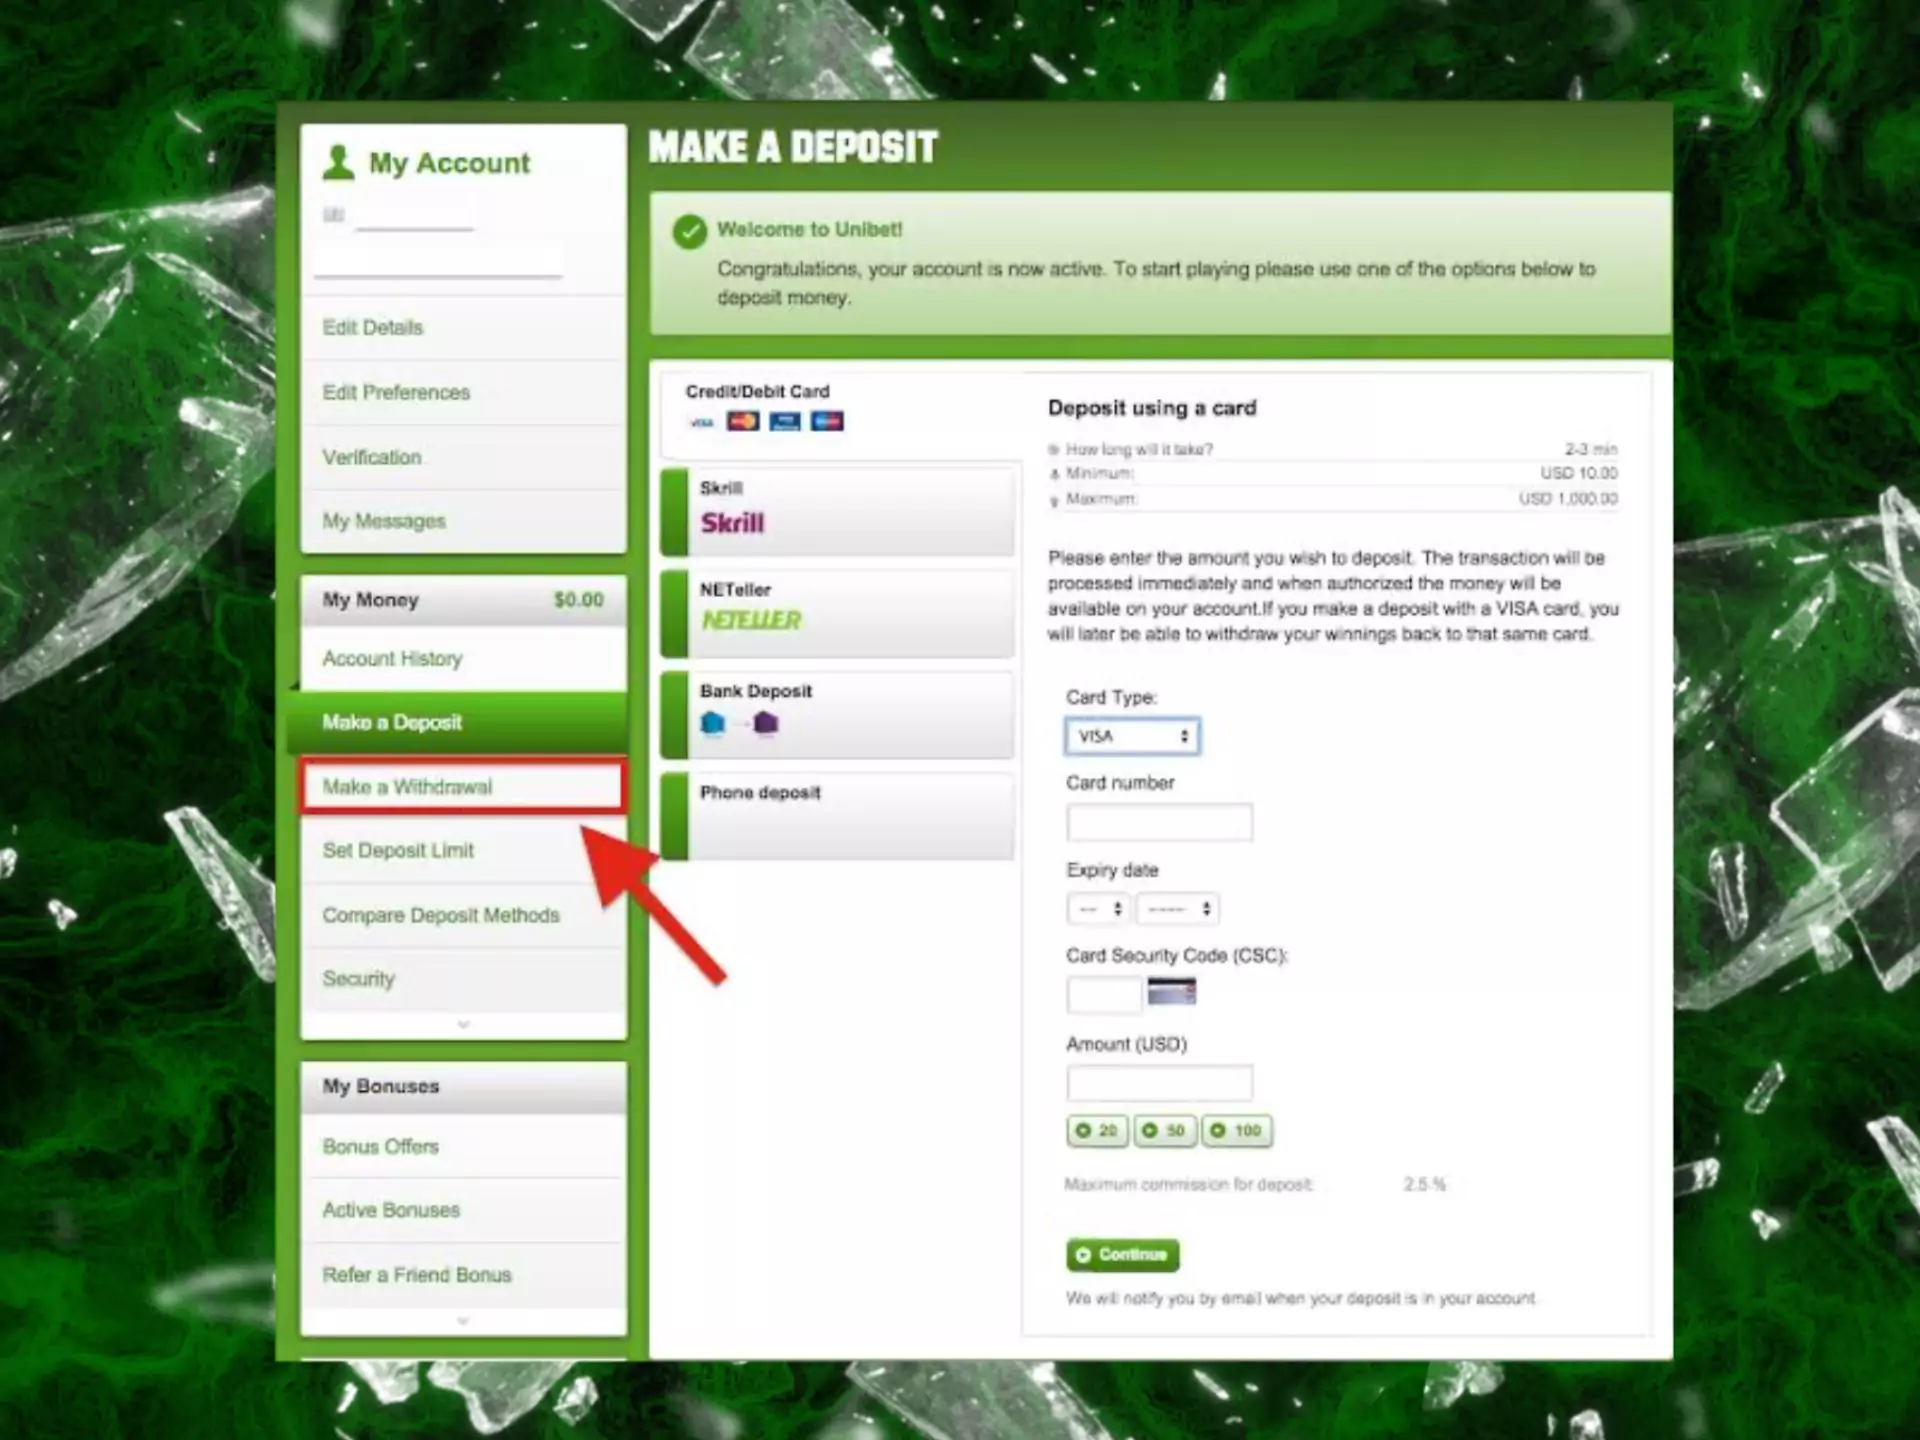 You can withdraw money the same way you have deposited it at Unibet.